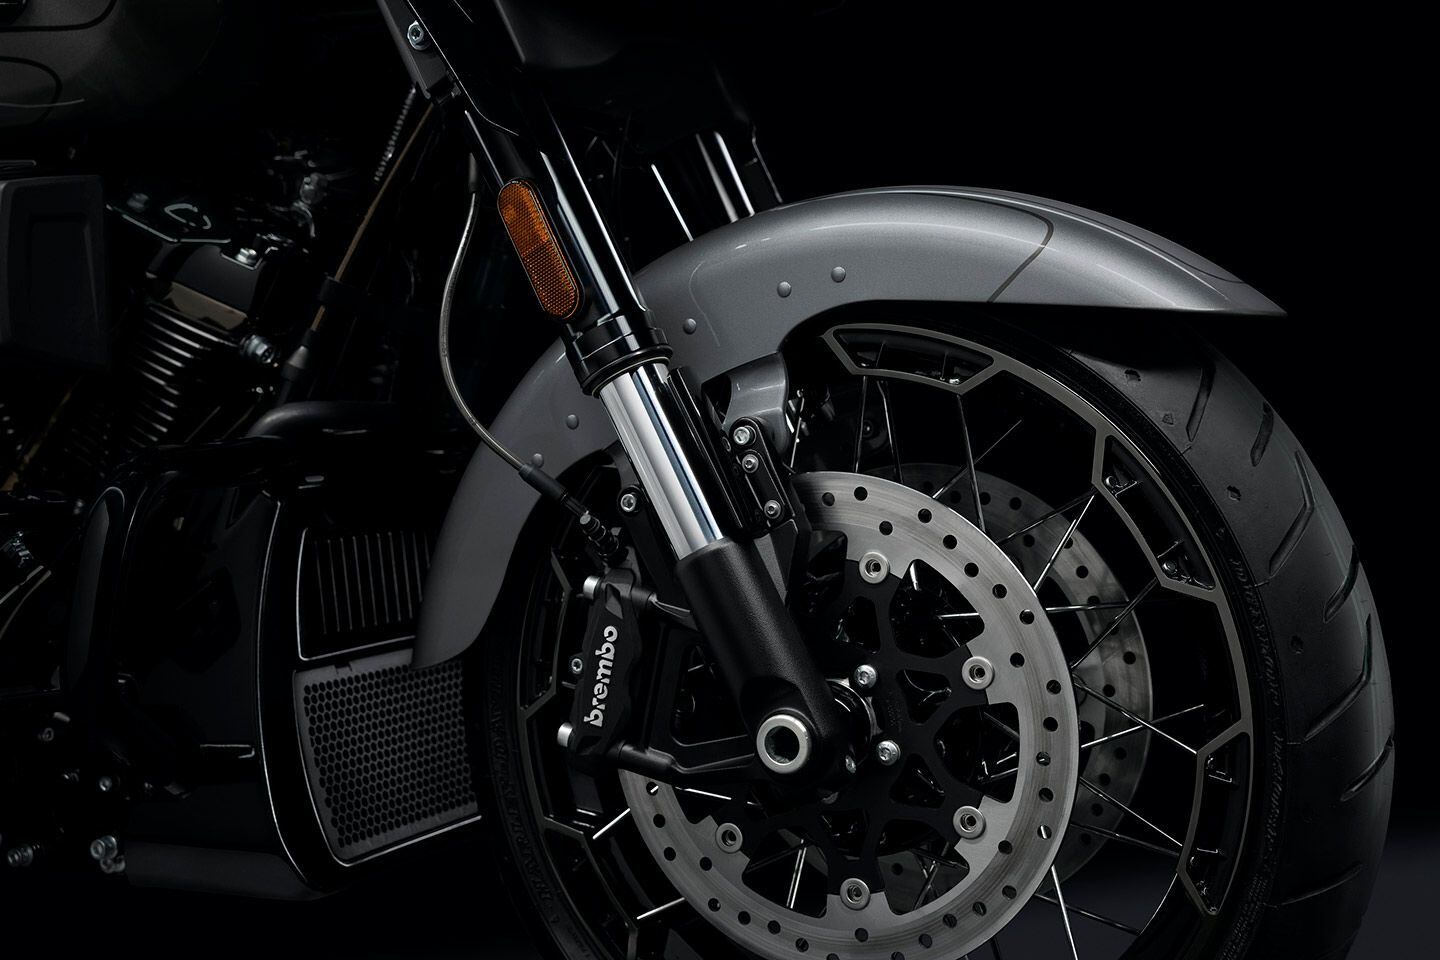 New inverted Showa fork adds 50 percent more travel than on previous CVO model; beefier brake discs with four-pot calipers also appear up front.